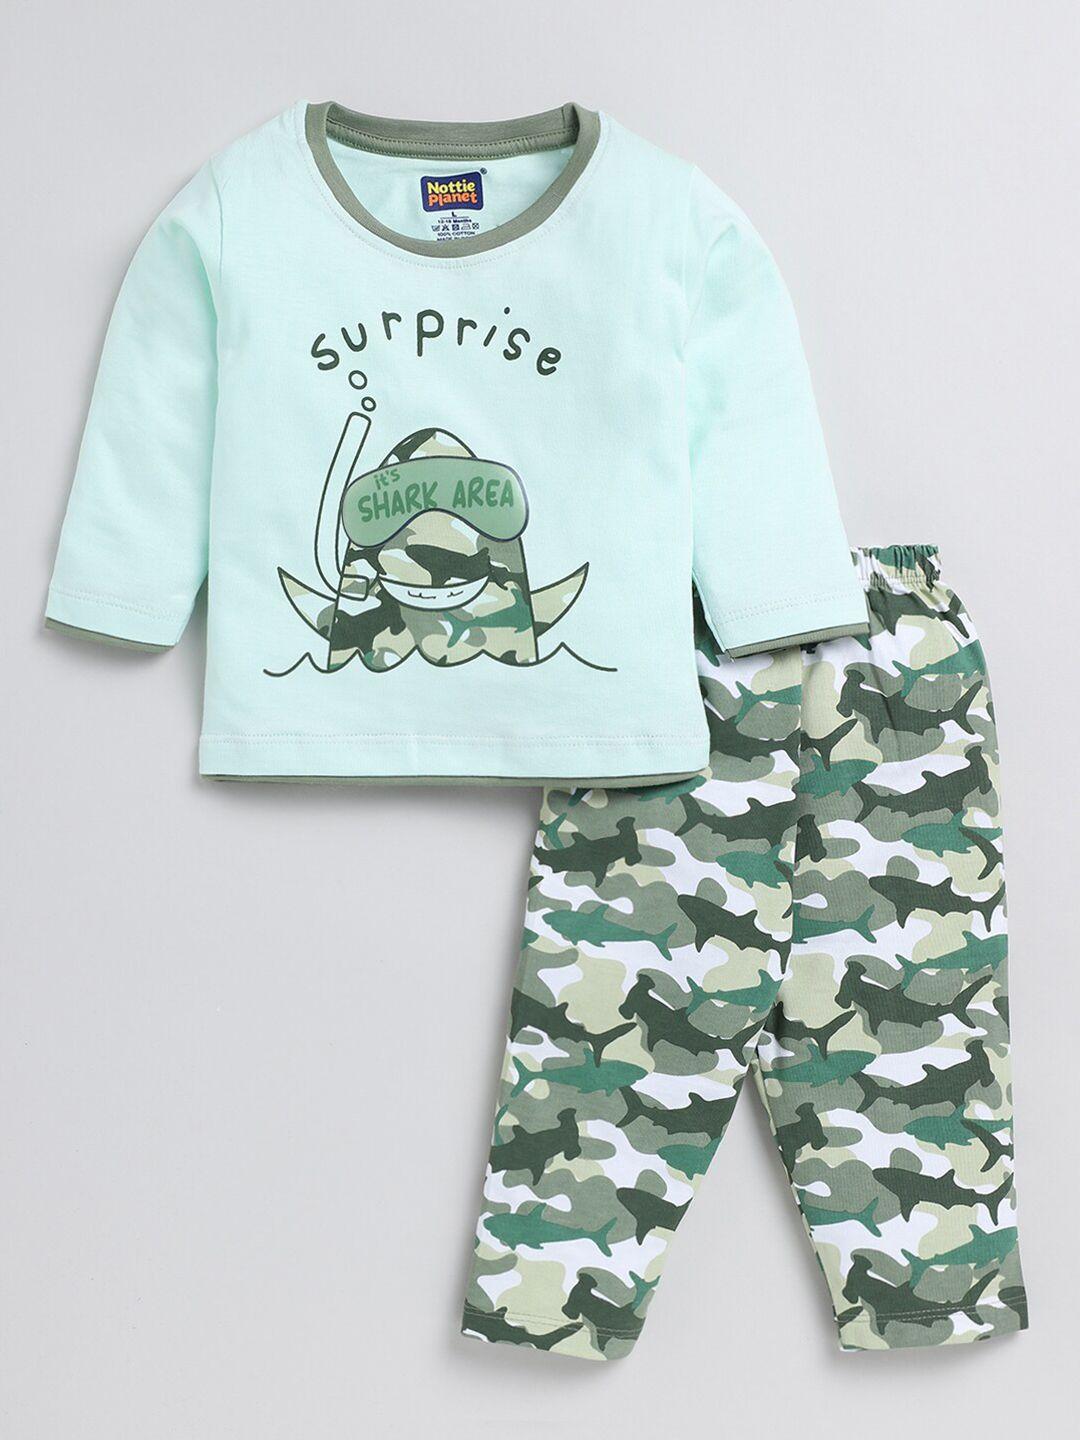 nottie planet boys cotton printed t-shirt with trousers